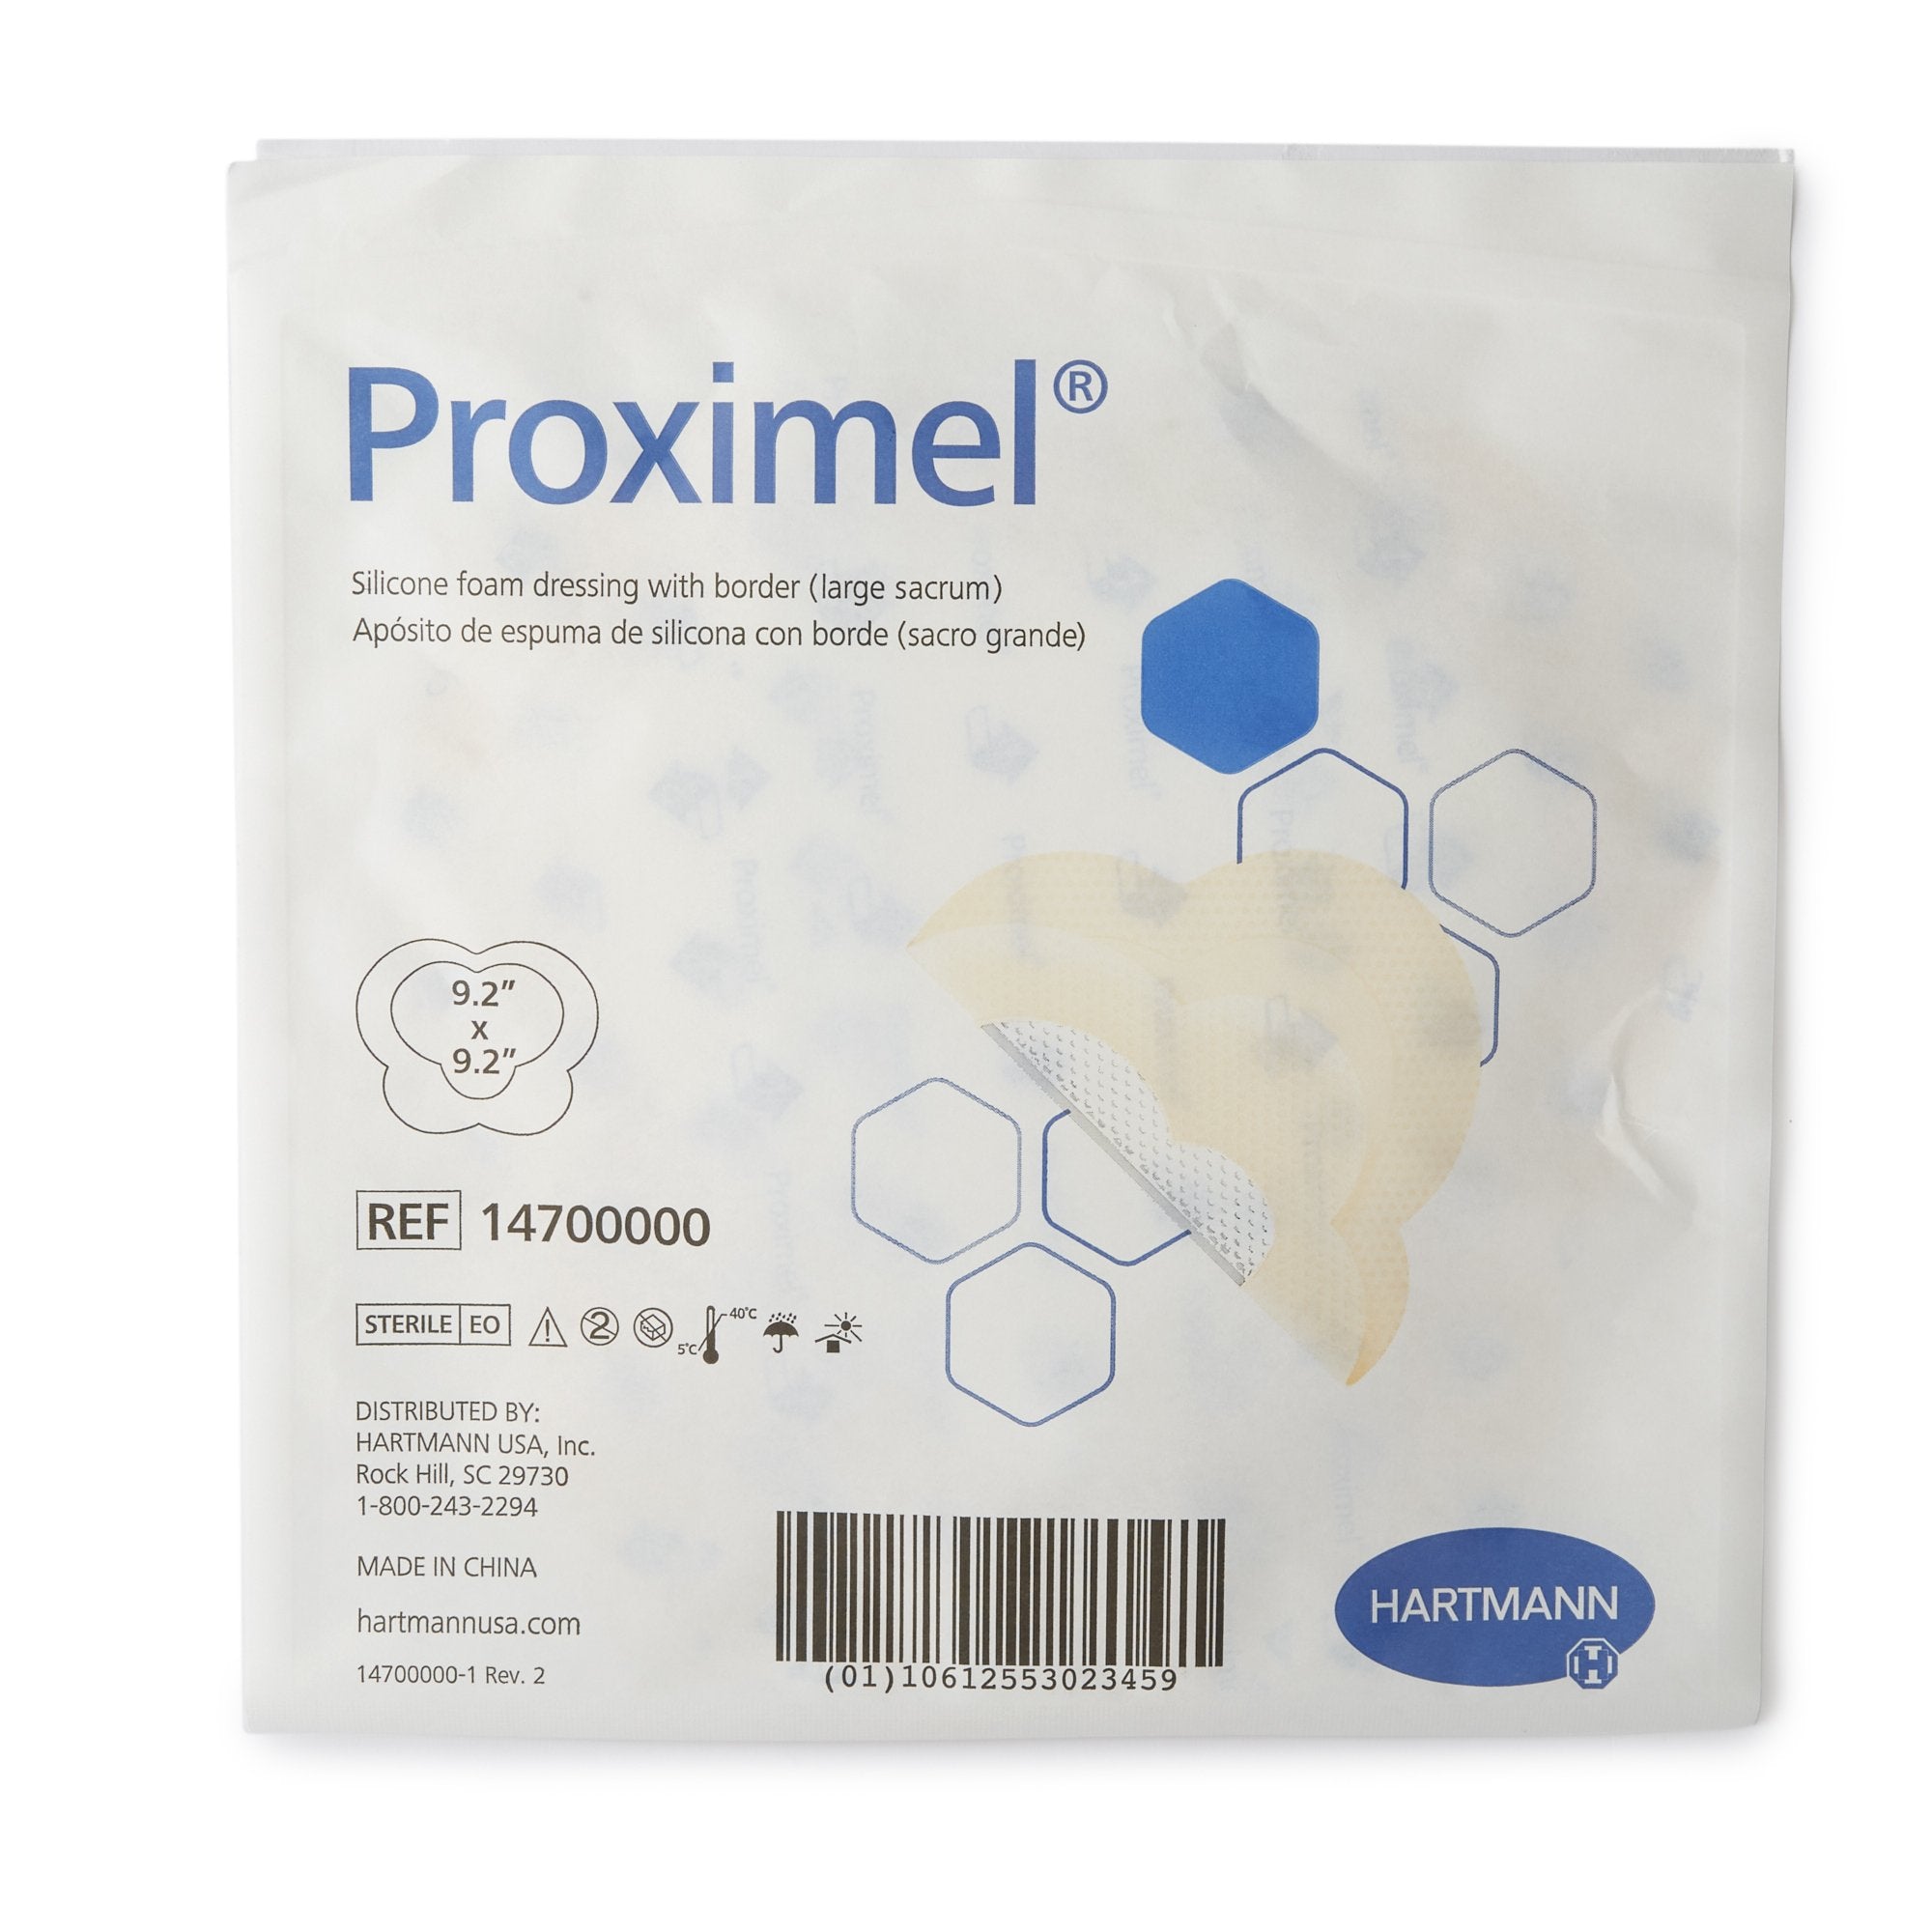 Foam Dressing Proximel® 9-1/5 X 9-1/5 Inch With Border Waterproof Film Backing Silicone Adhesive Sacral Sterile